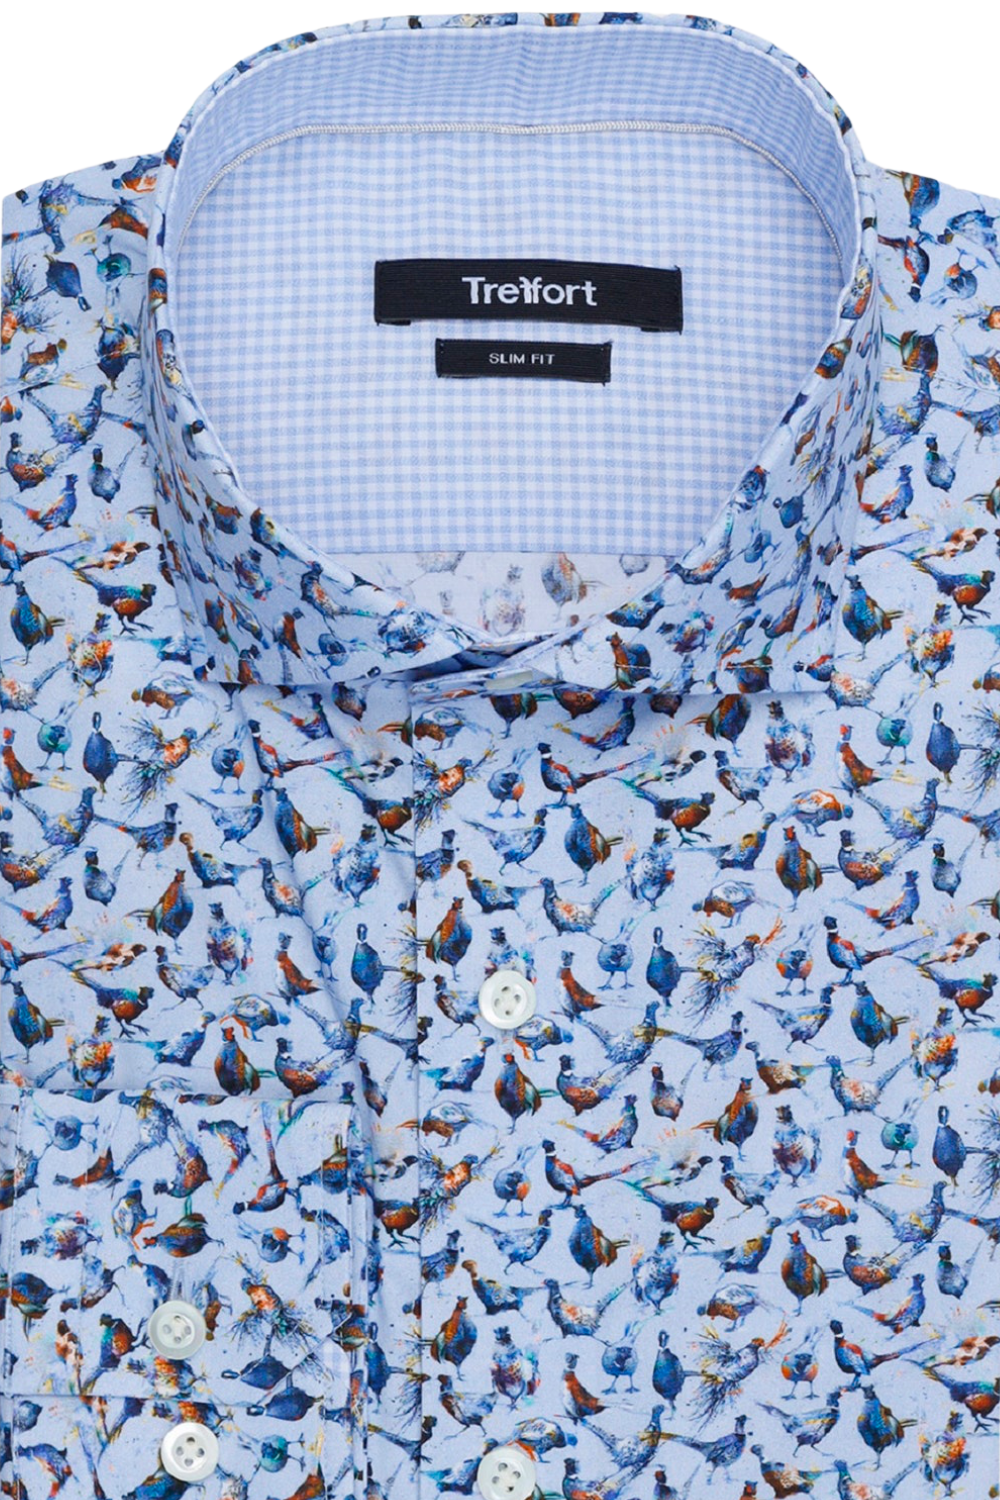 HIGH END LUXURY BLUE MULTICOLOR PHEASANT SLIM FIT DRESS SHIRT with BIRDS